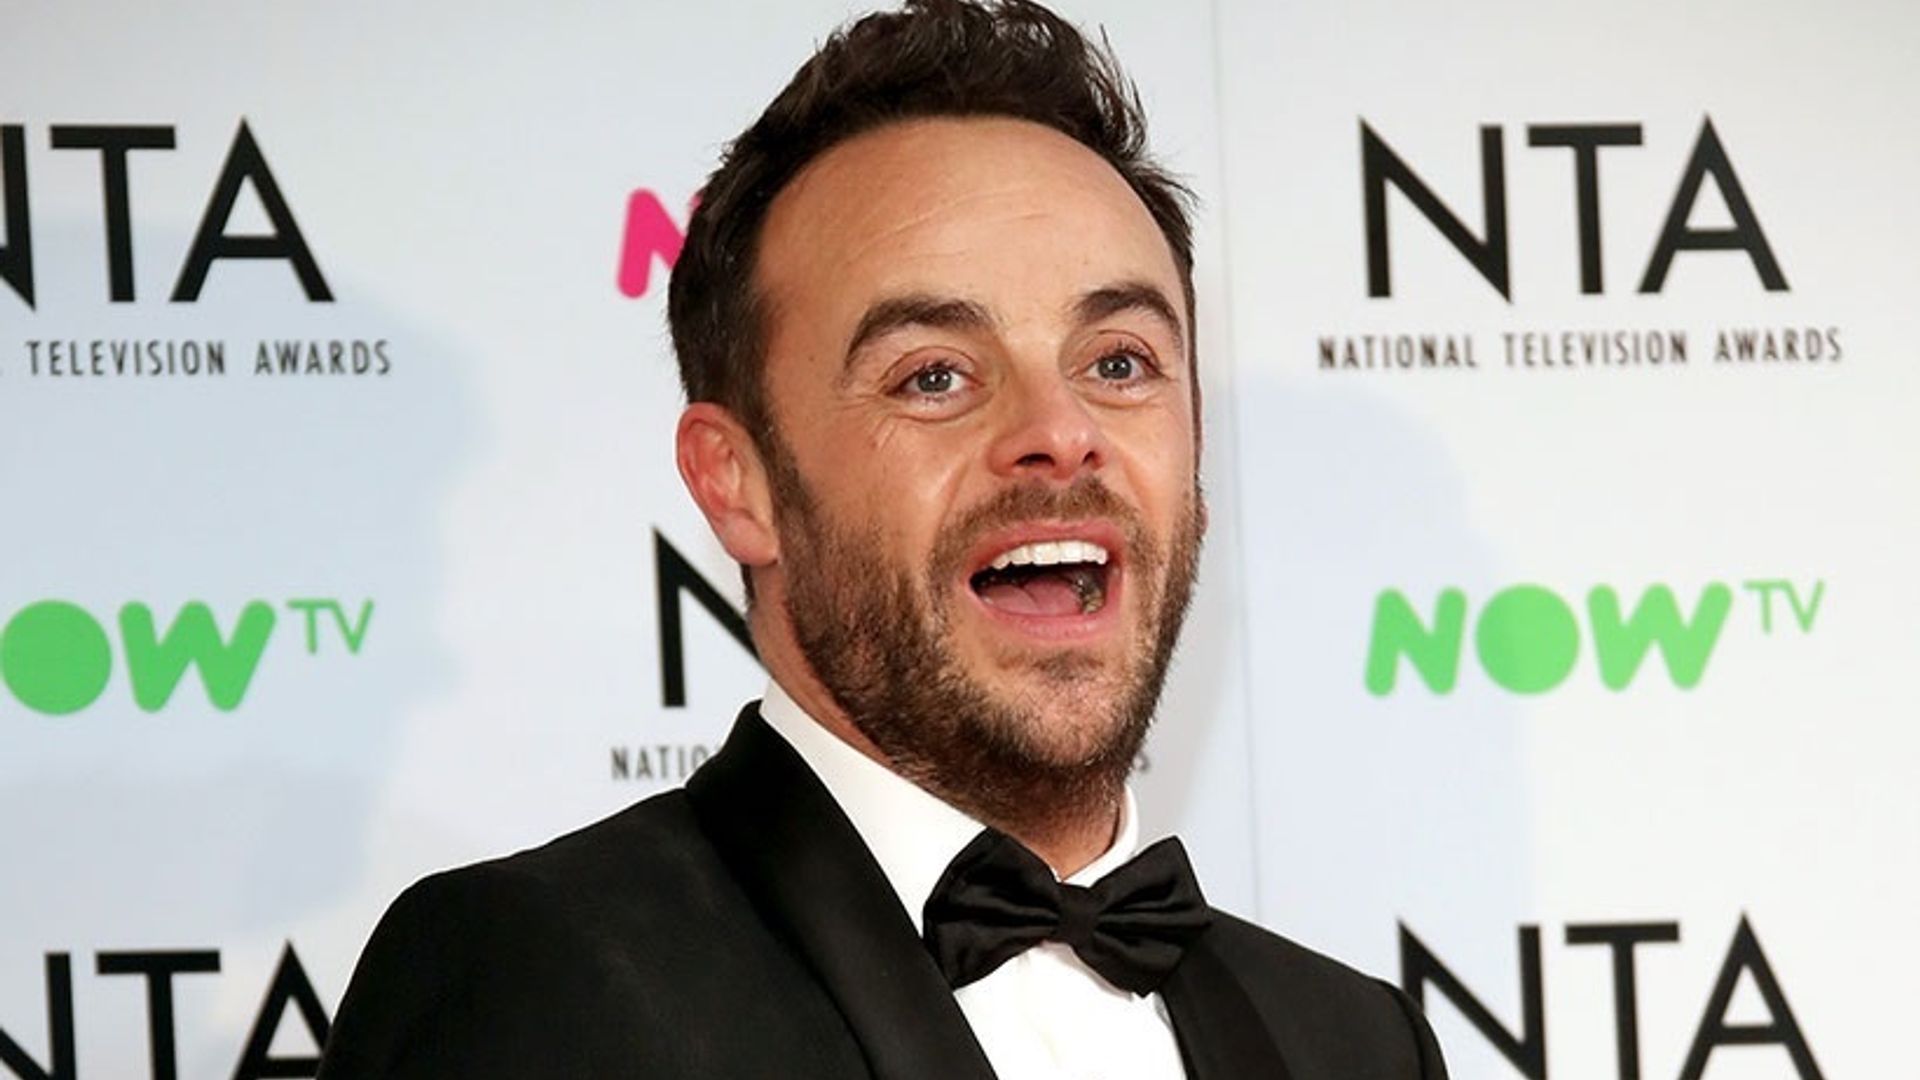 Ant McPartlin shares personal message to fans after confirming extended TV break